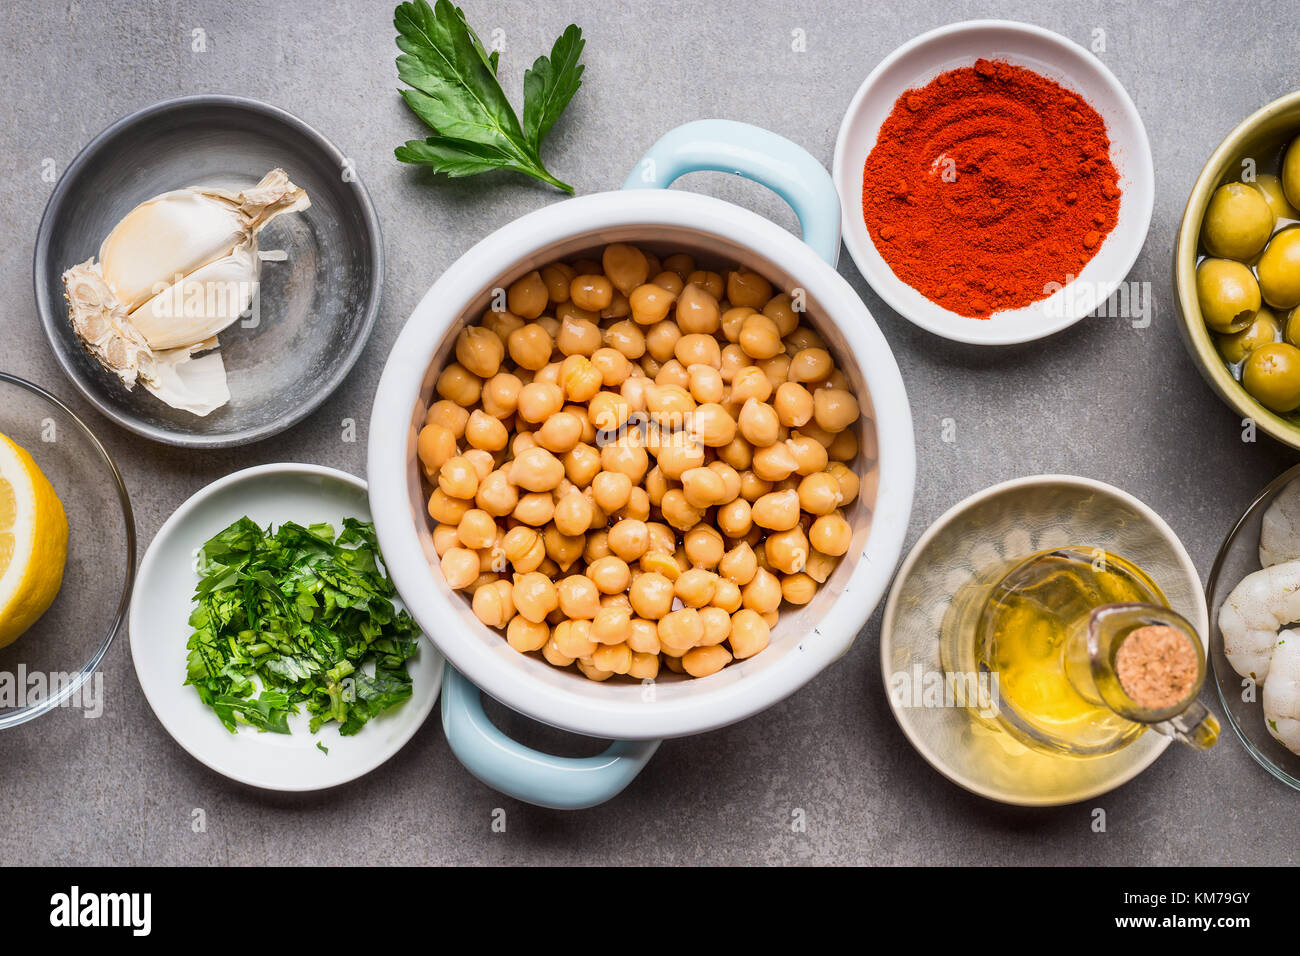 Cooking ingredients in bowls for Chickpea salad on gray concrete background, top view, close up. Healthy , clean food or vegetarian cooking and eating Stock Photo